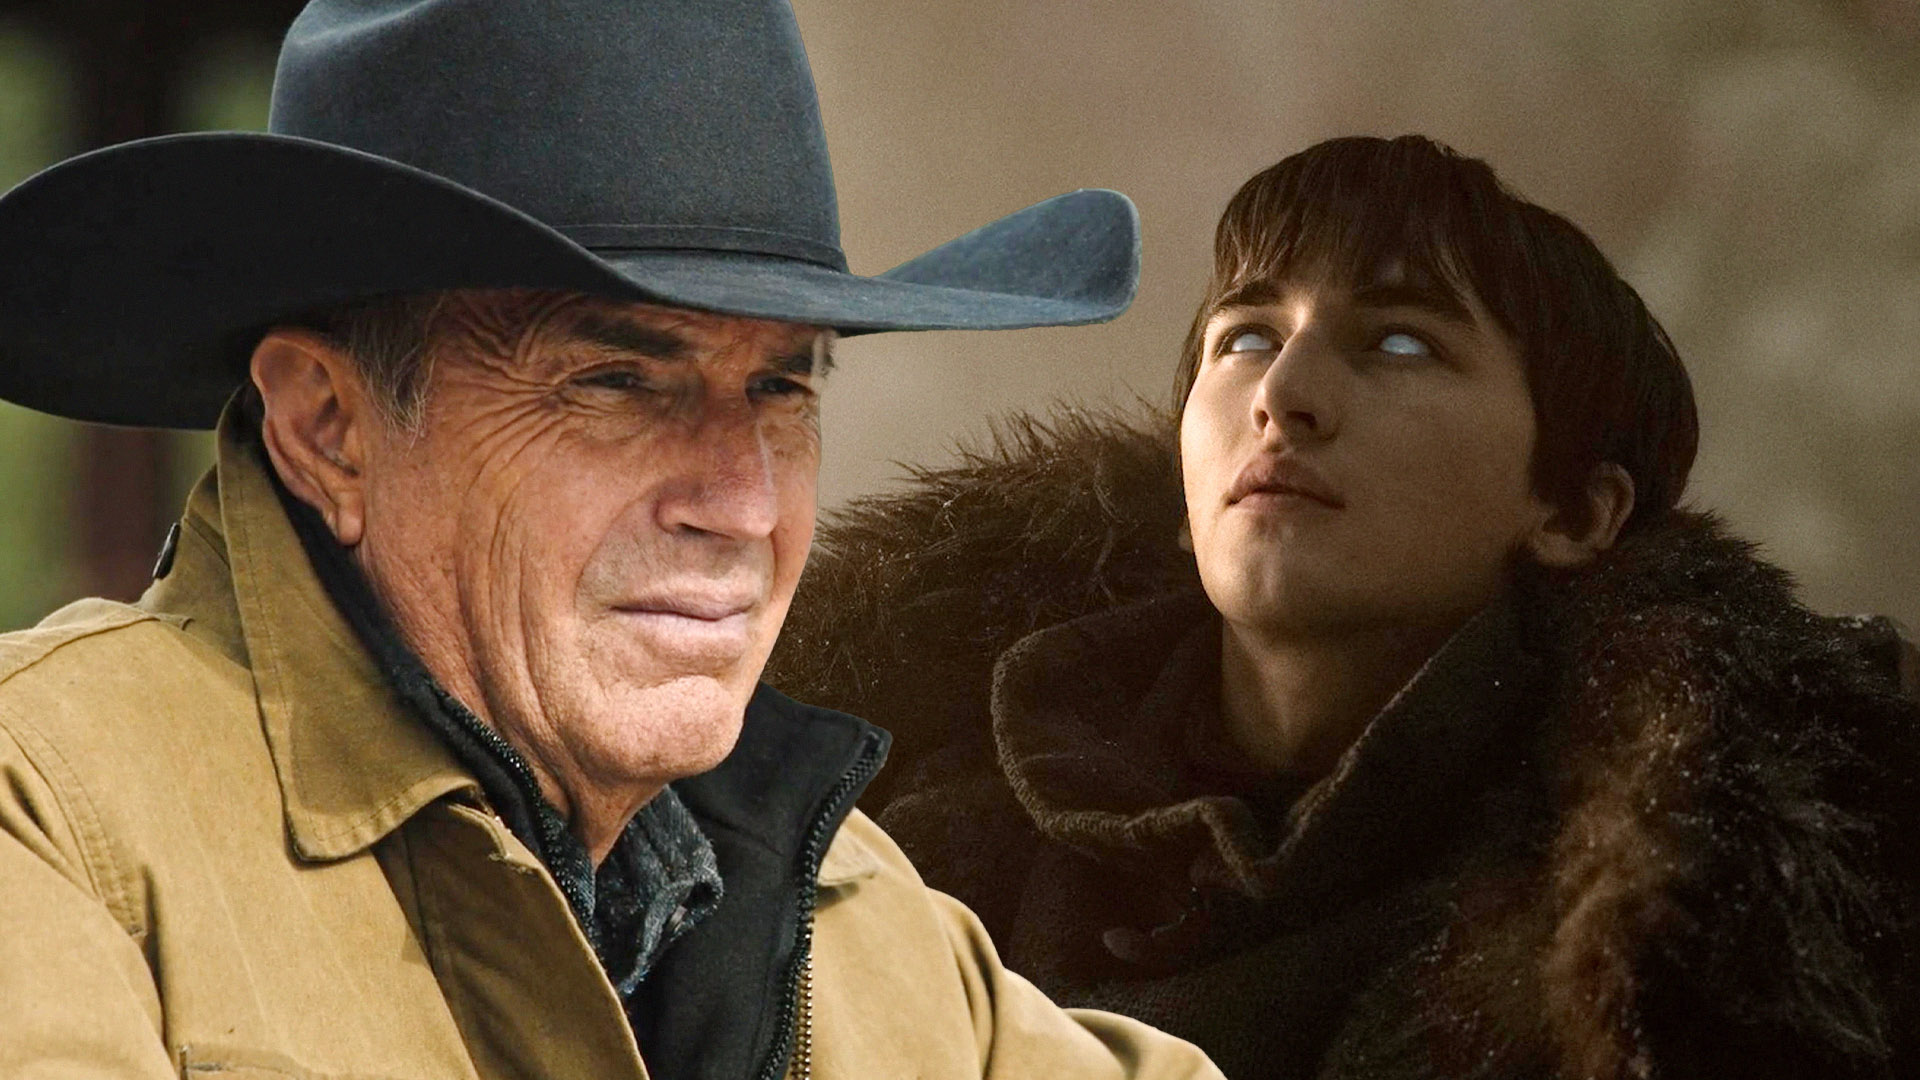 Yellowstone's Ending Will Be a Disaster of Game of Thrones' Proportions